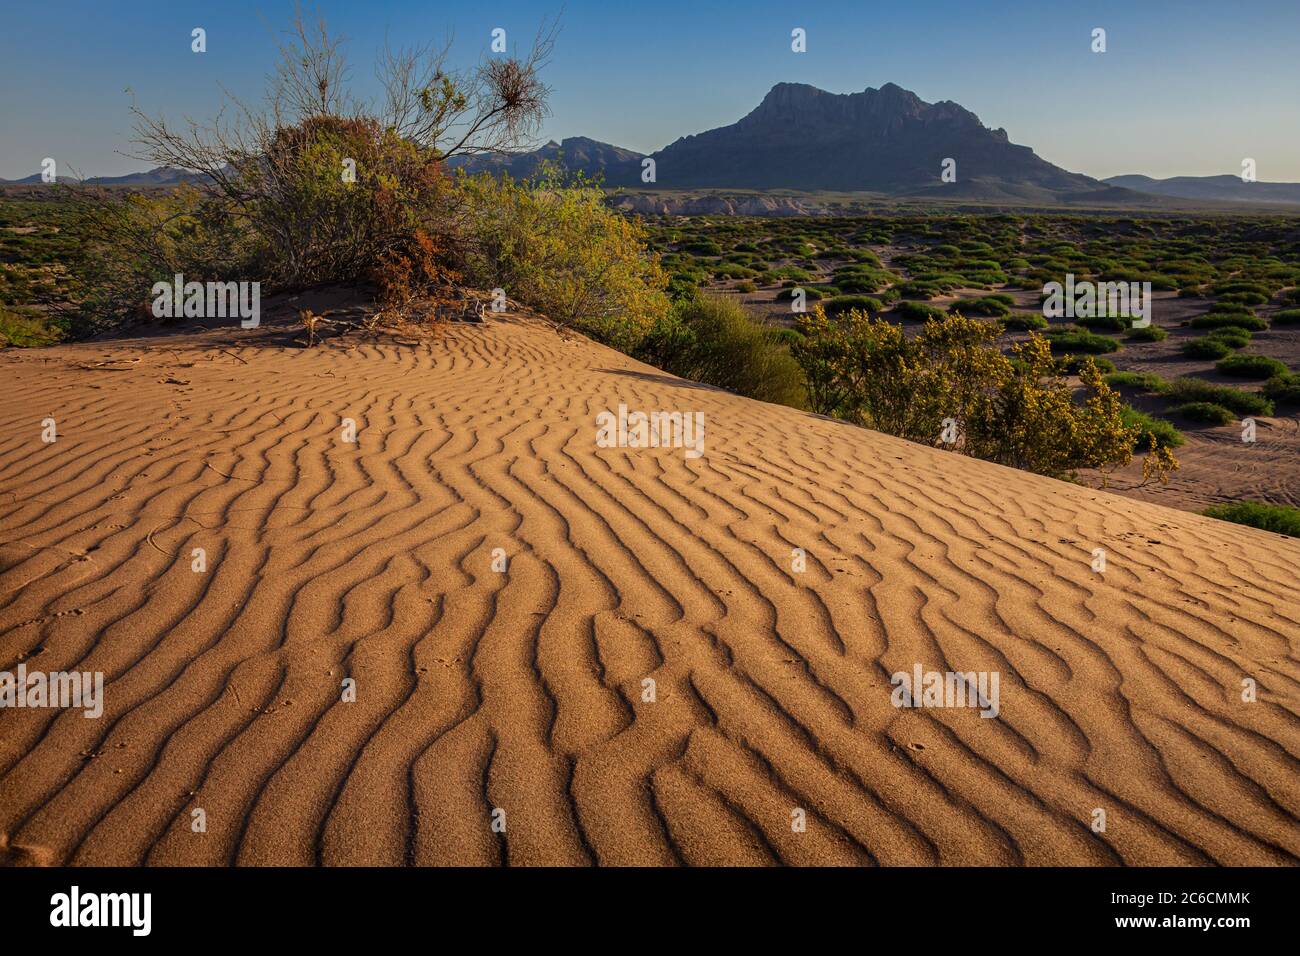 Hot Well Dunes provides unique desert habitat and recreational opportunities. Southern Arizona. Stock Photo